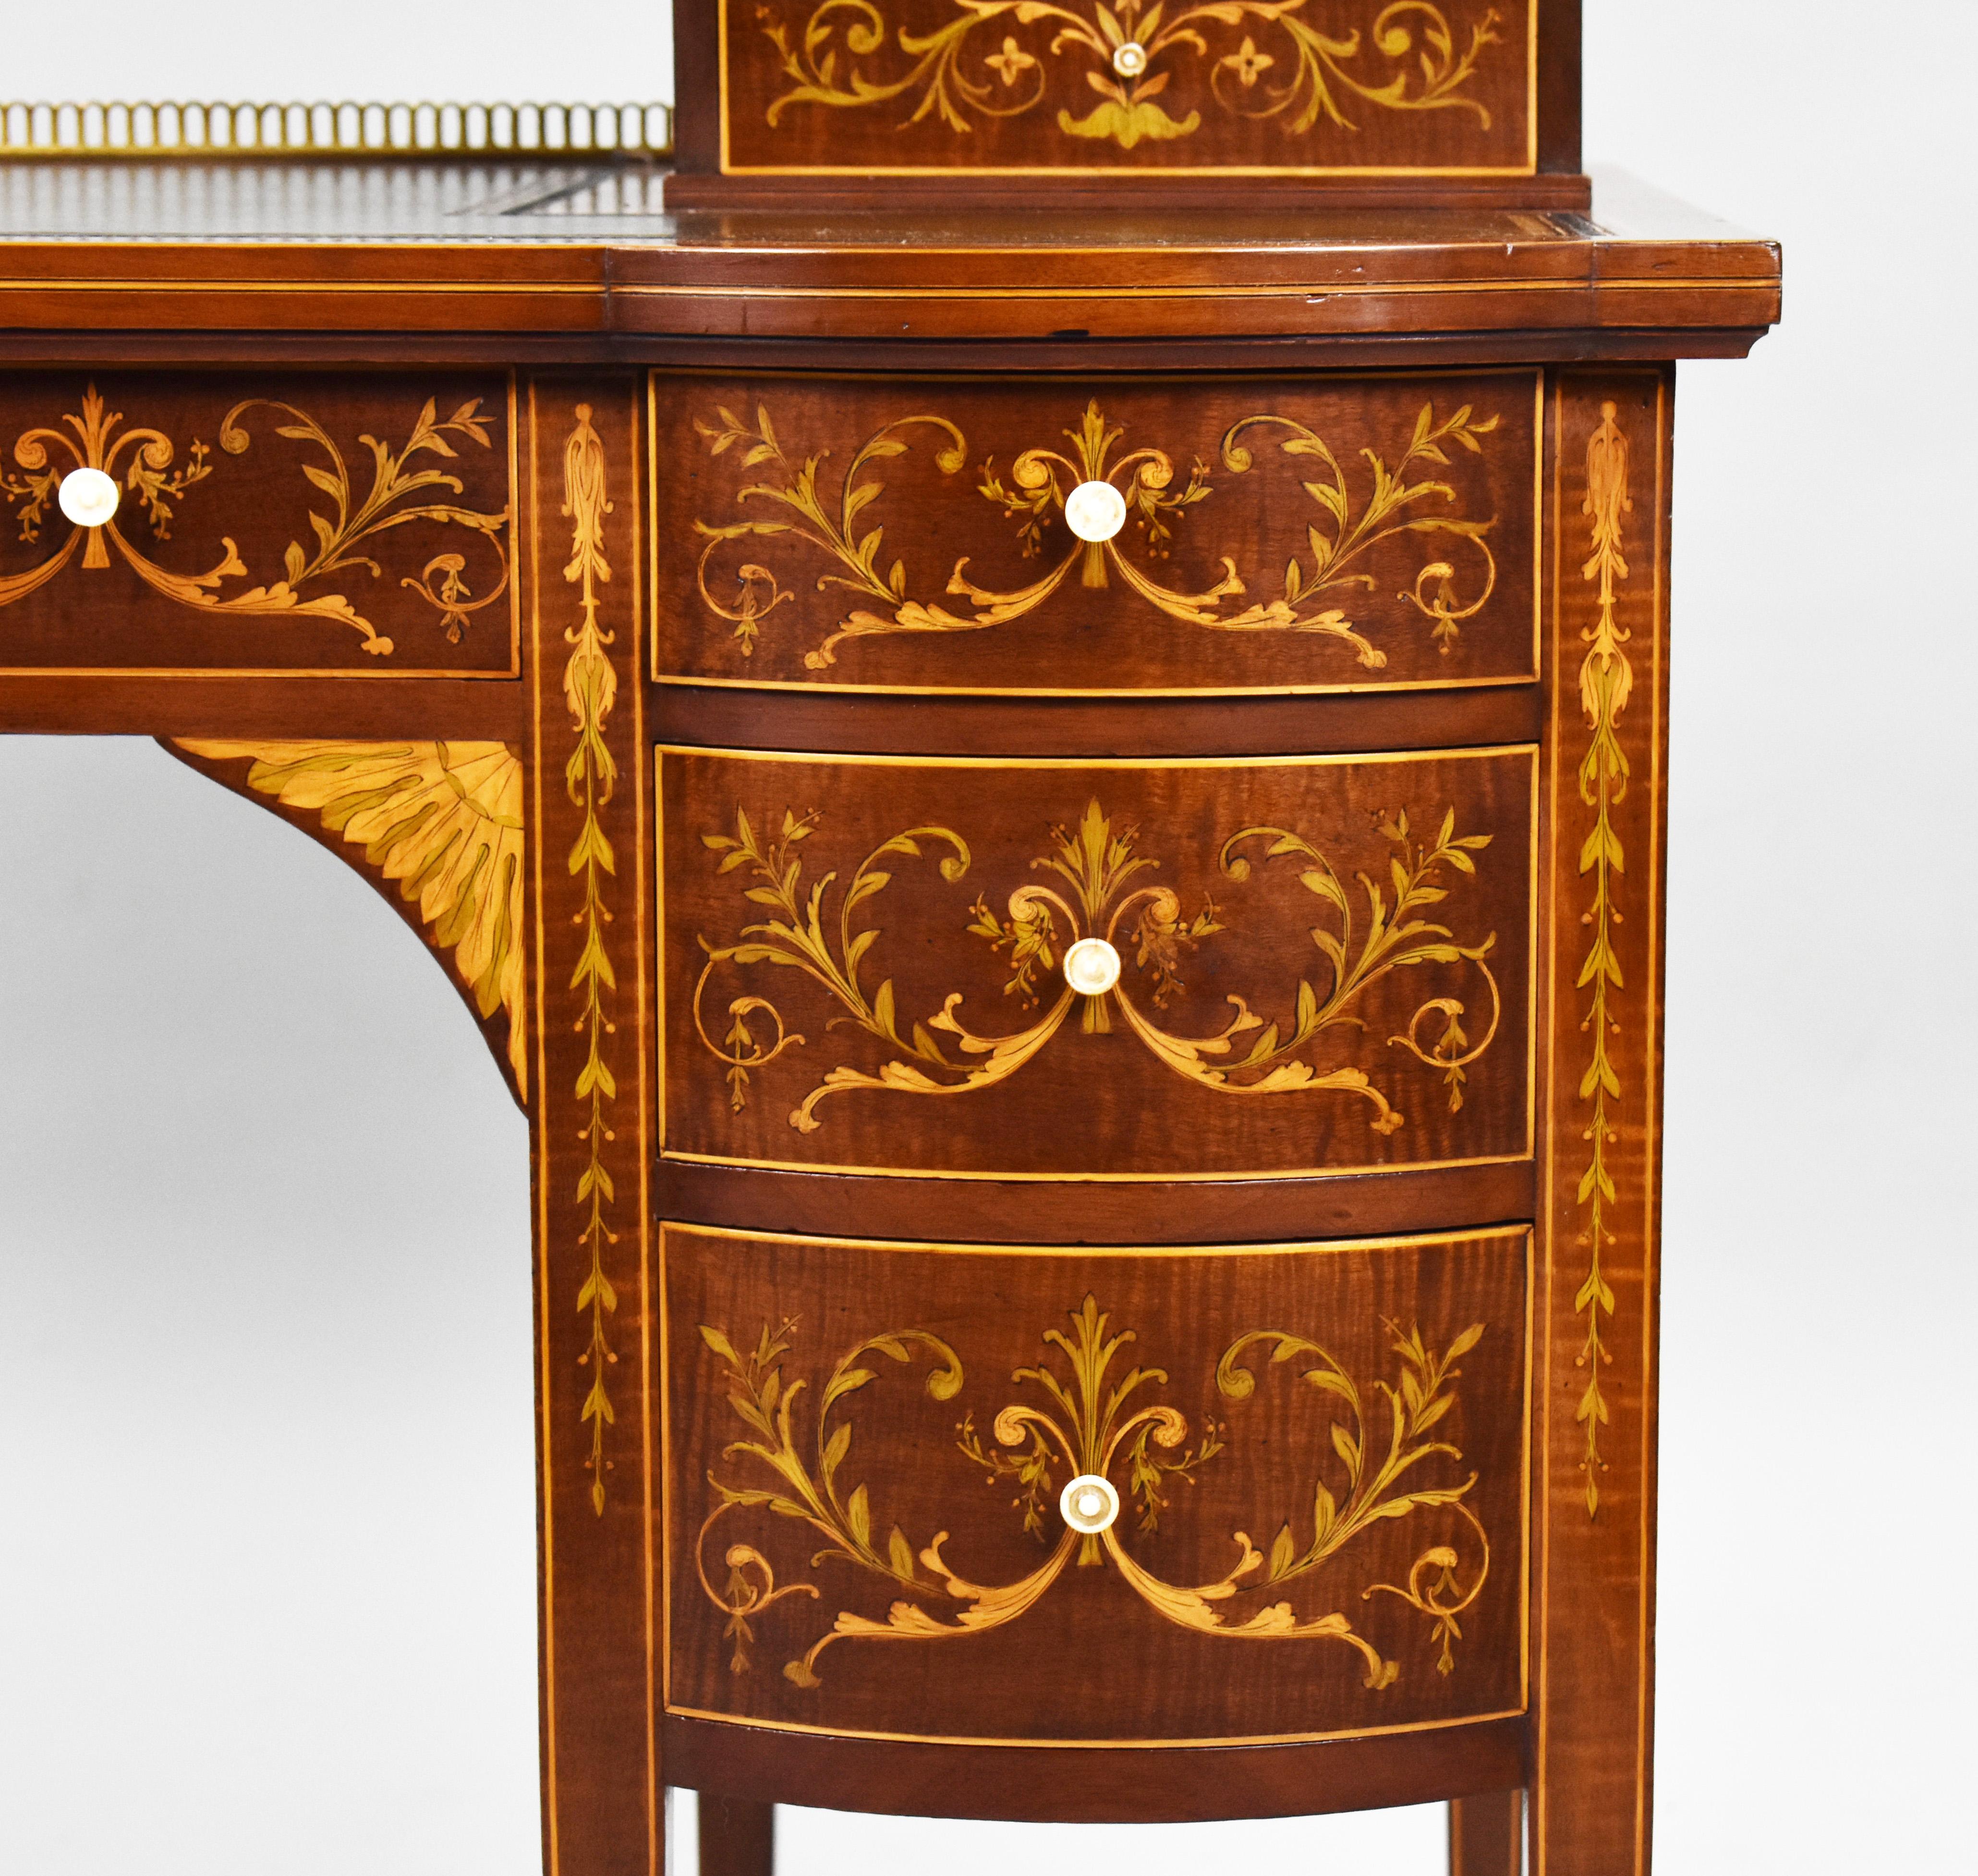 19th Century English Victorian Marquetry Inlaid Carlton House Desk For Sale 4